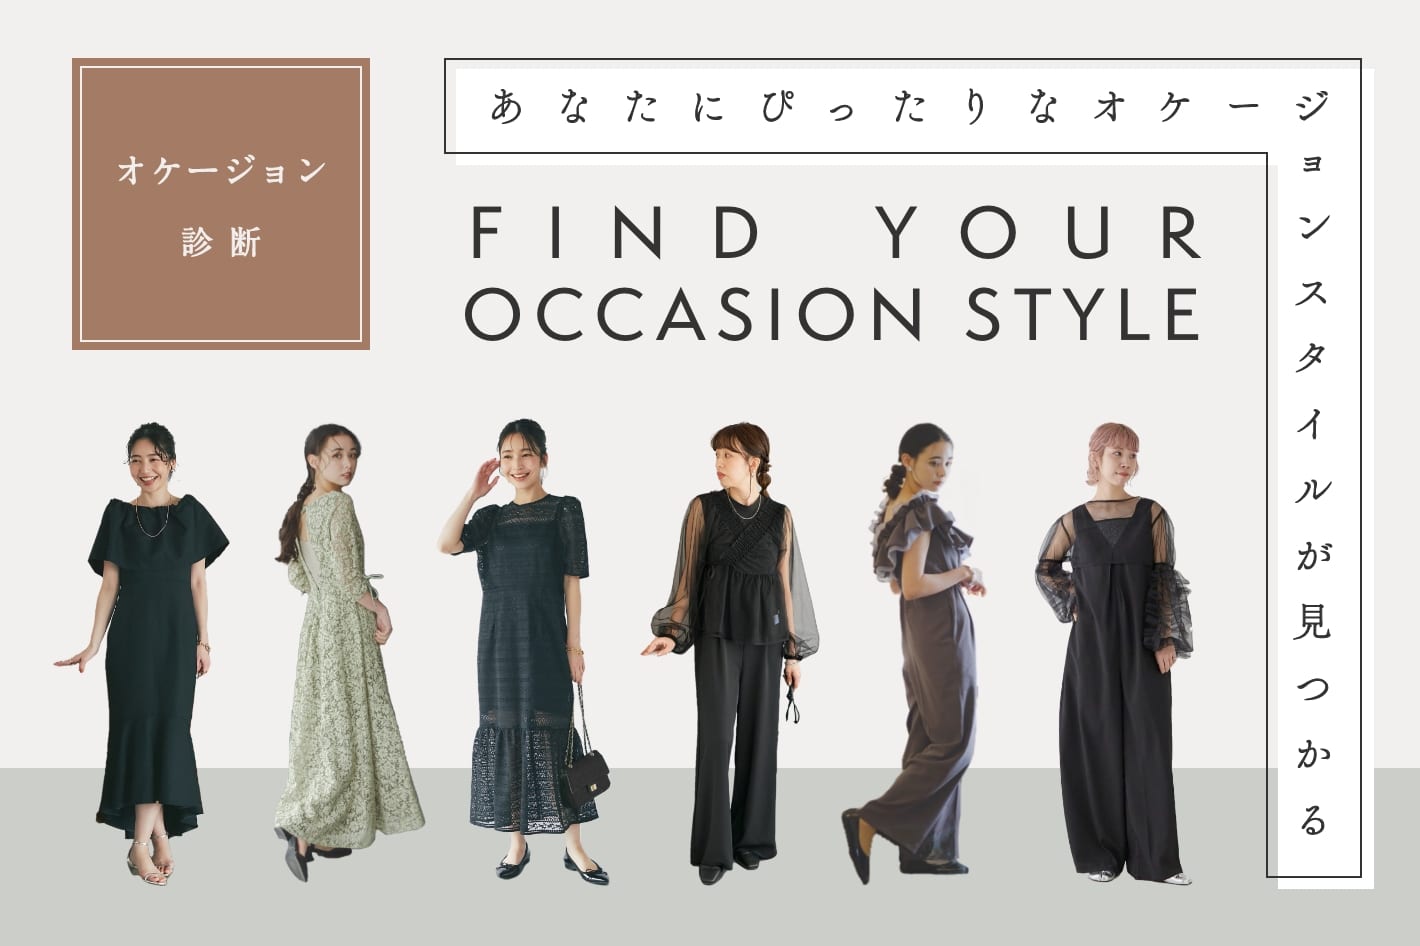 FIND YOUR OCCASION STYLE